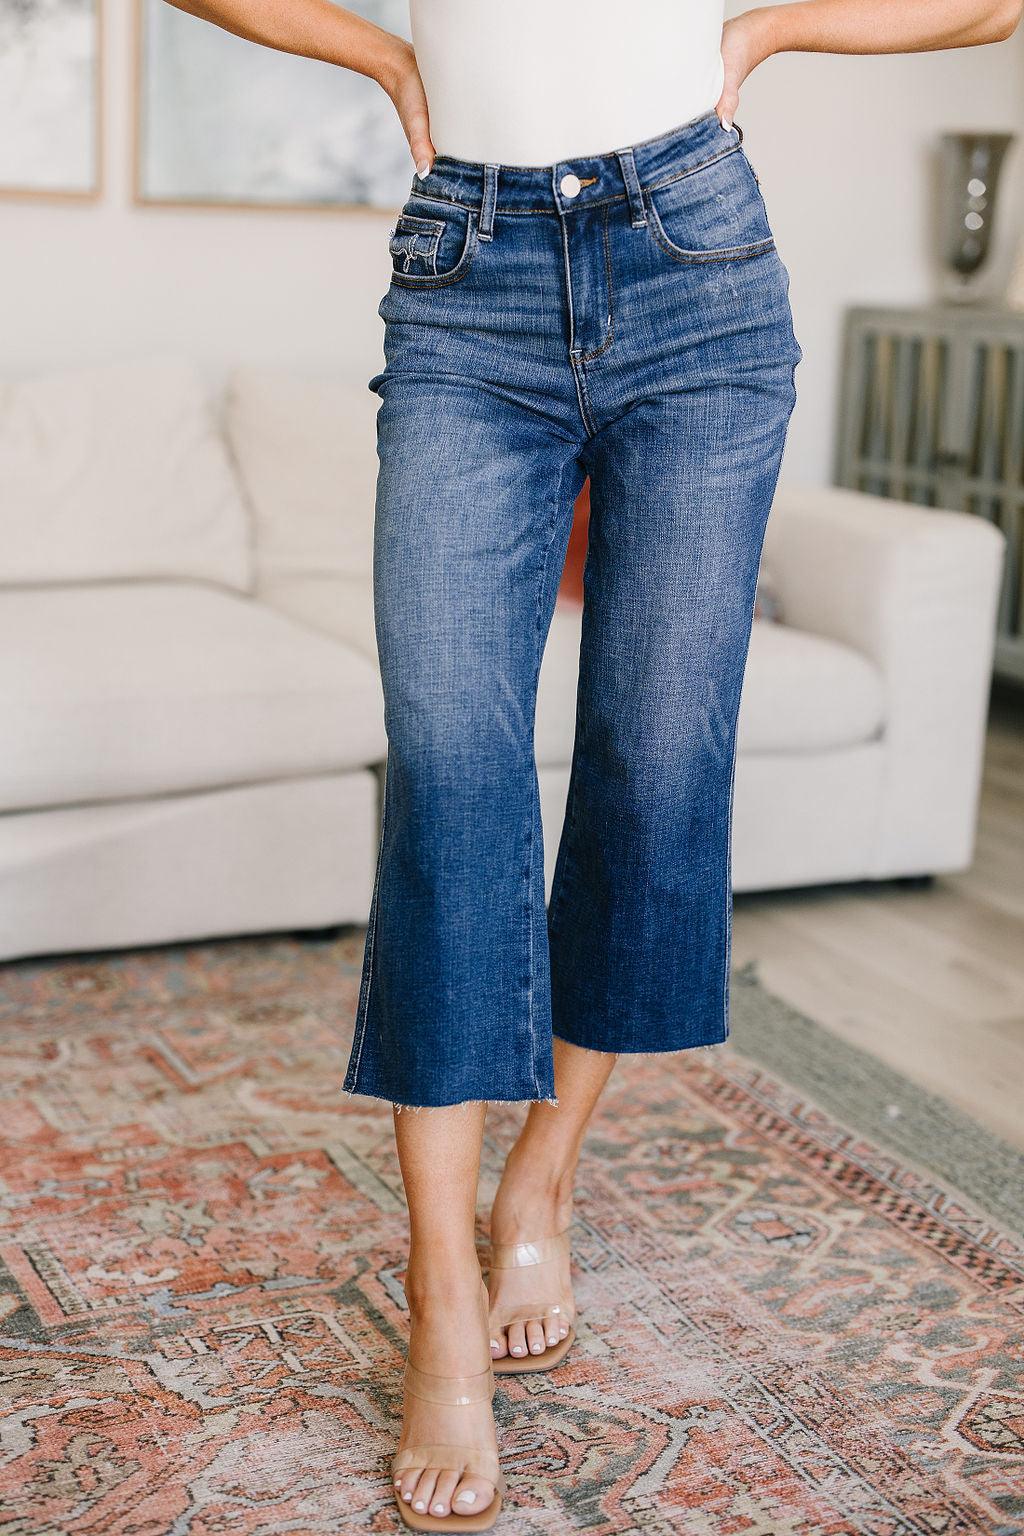 30% OFF SELECT JUDY BLUE JEANS